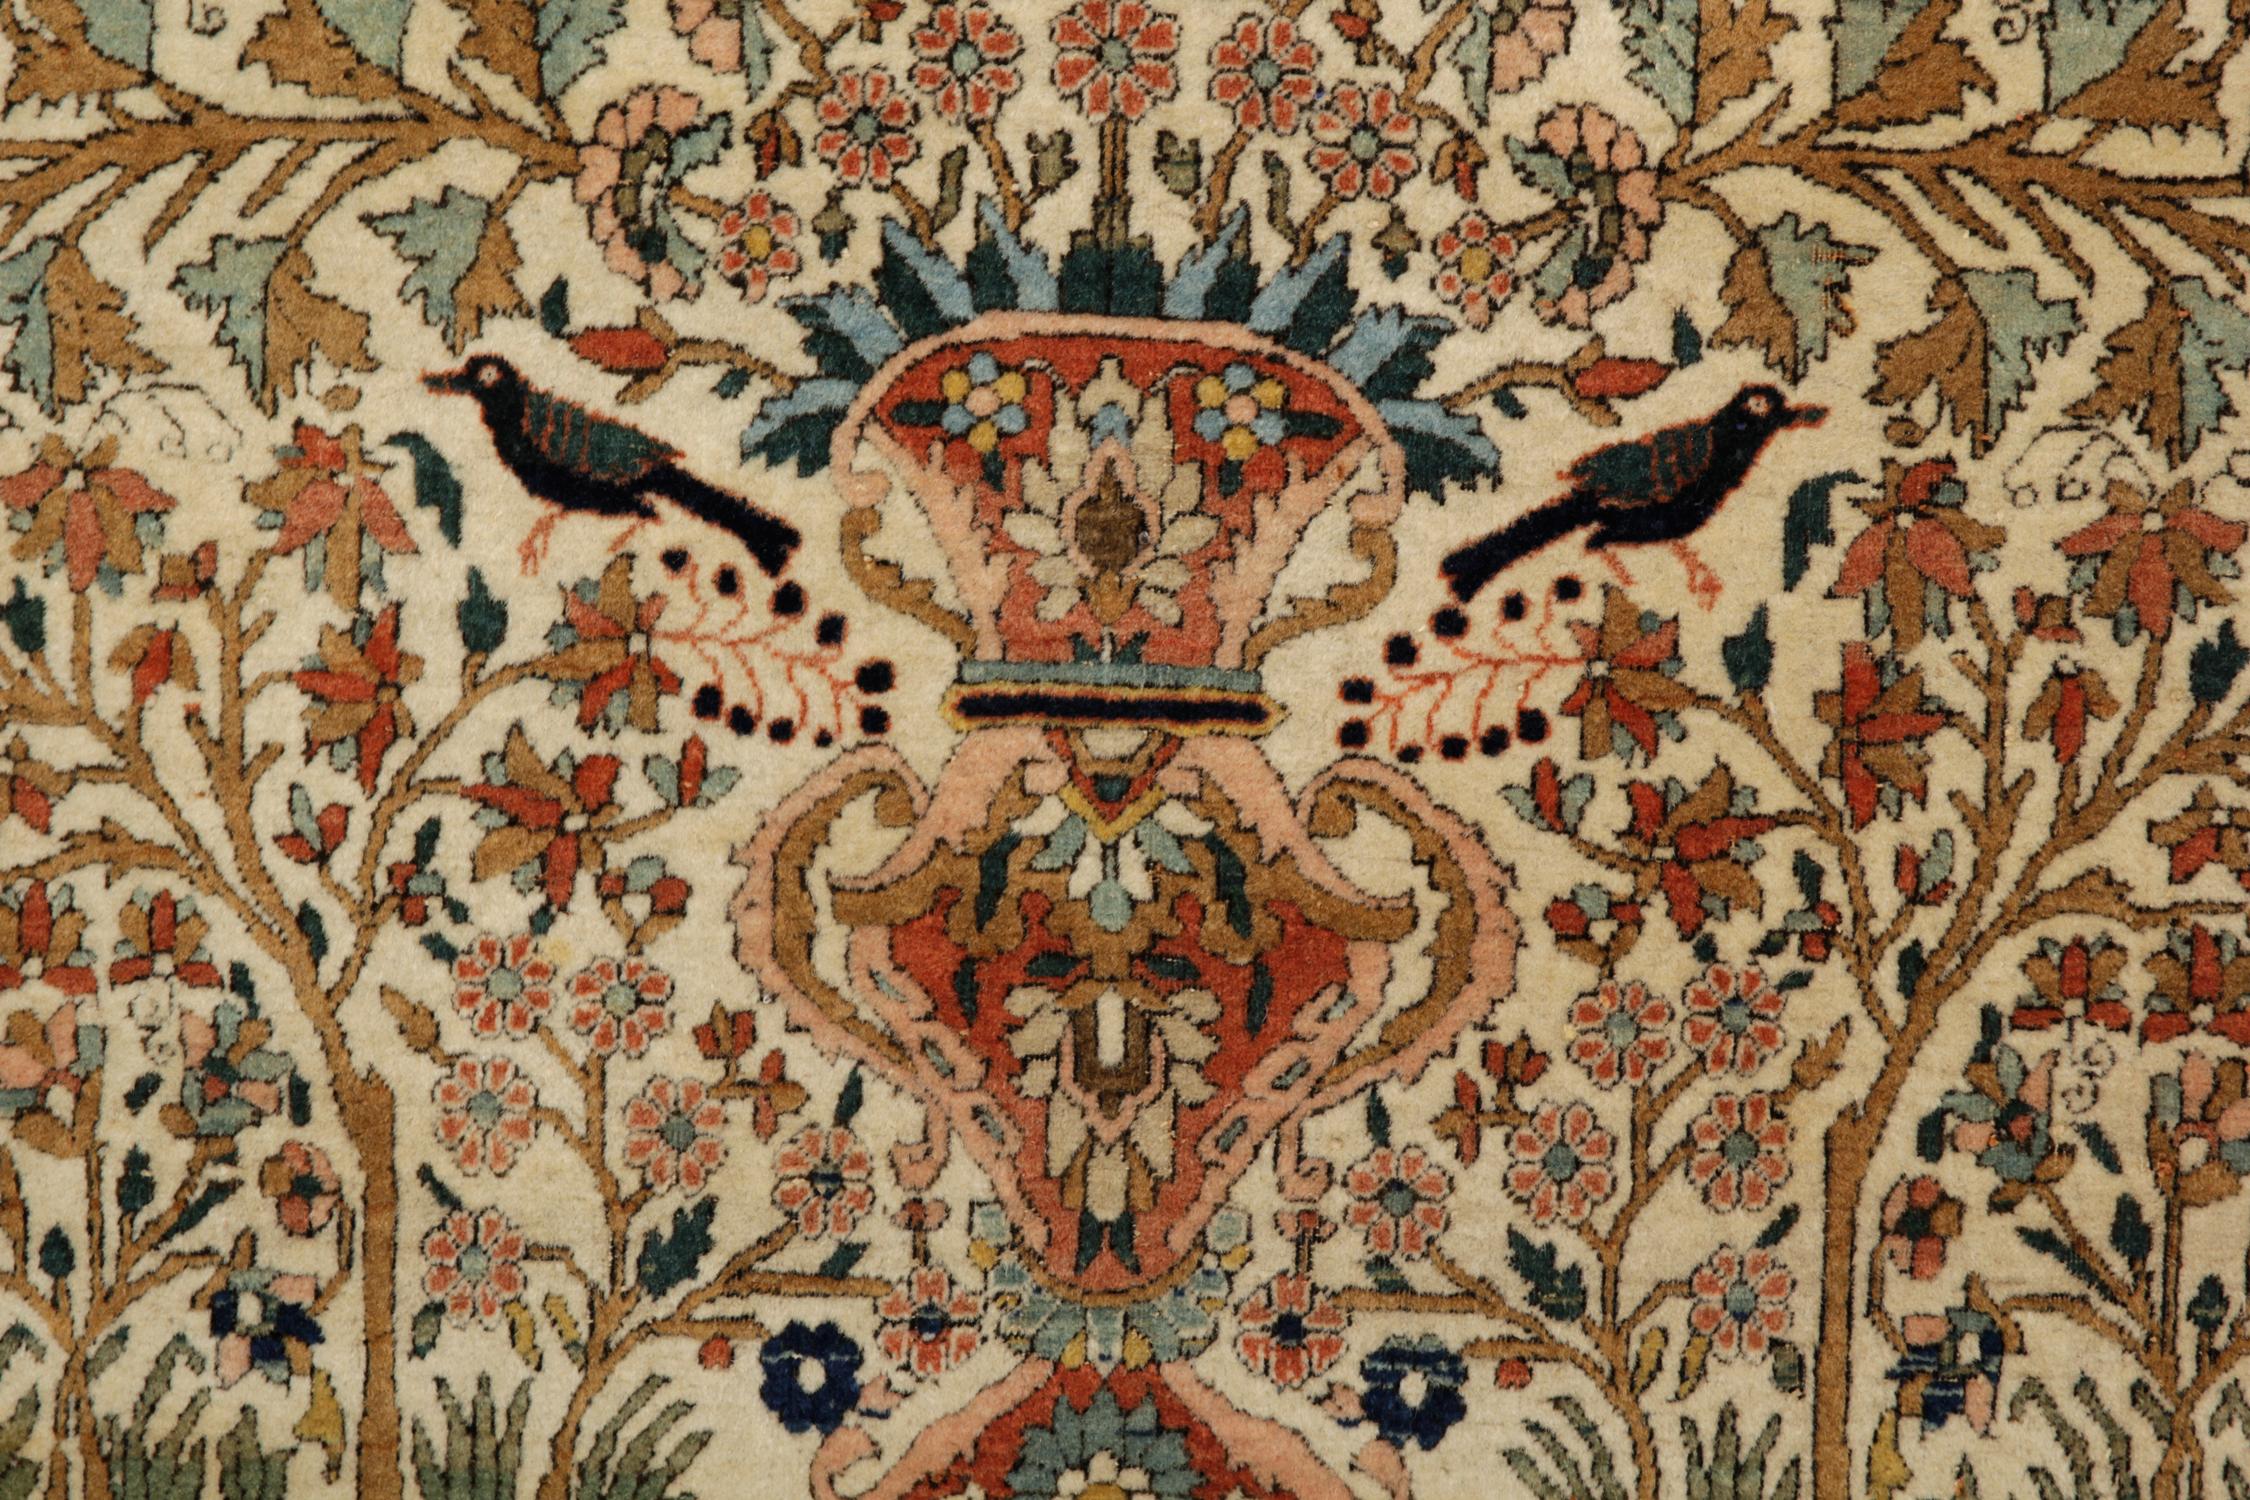 This wool rug is a fine example of antique area rugs woven in the late 19th century, circa 1880. The design features a intricately woven vase. Highly-detailed floral and botanical designs flow from the top of the vase woven in orange, blue and red